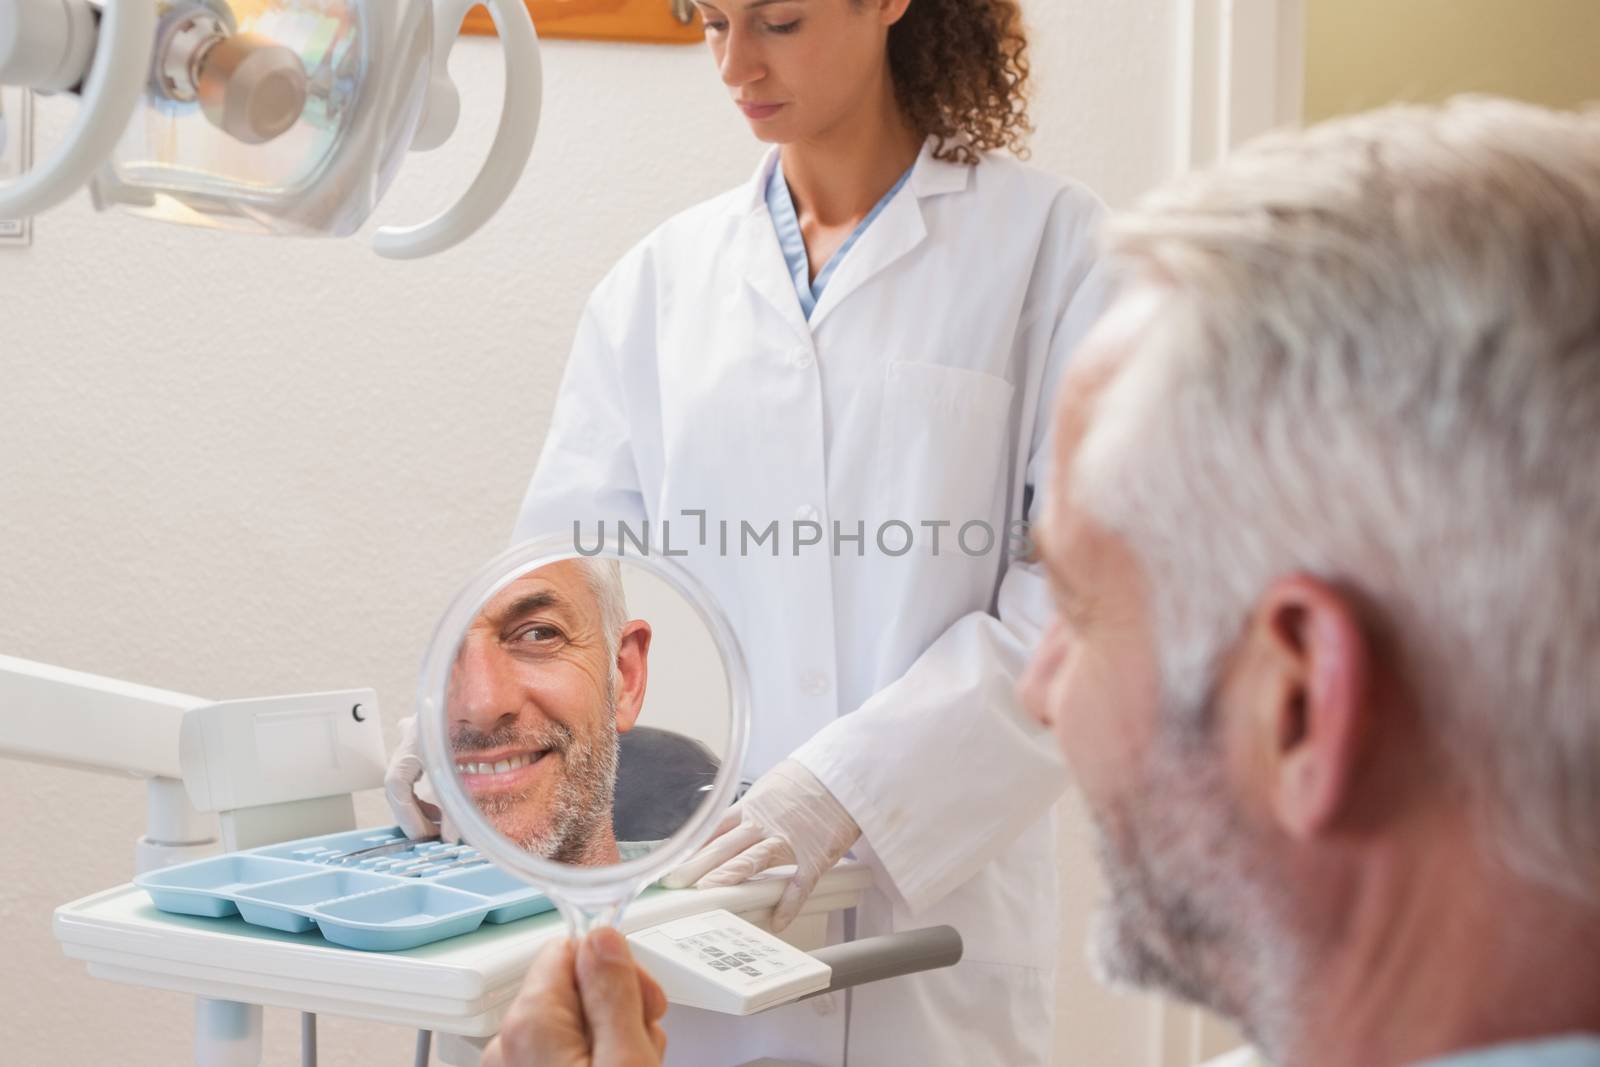 Patient admiring new smile in the mirror by Wavebreakmedia